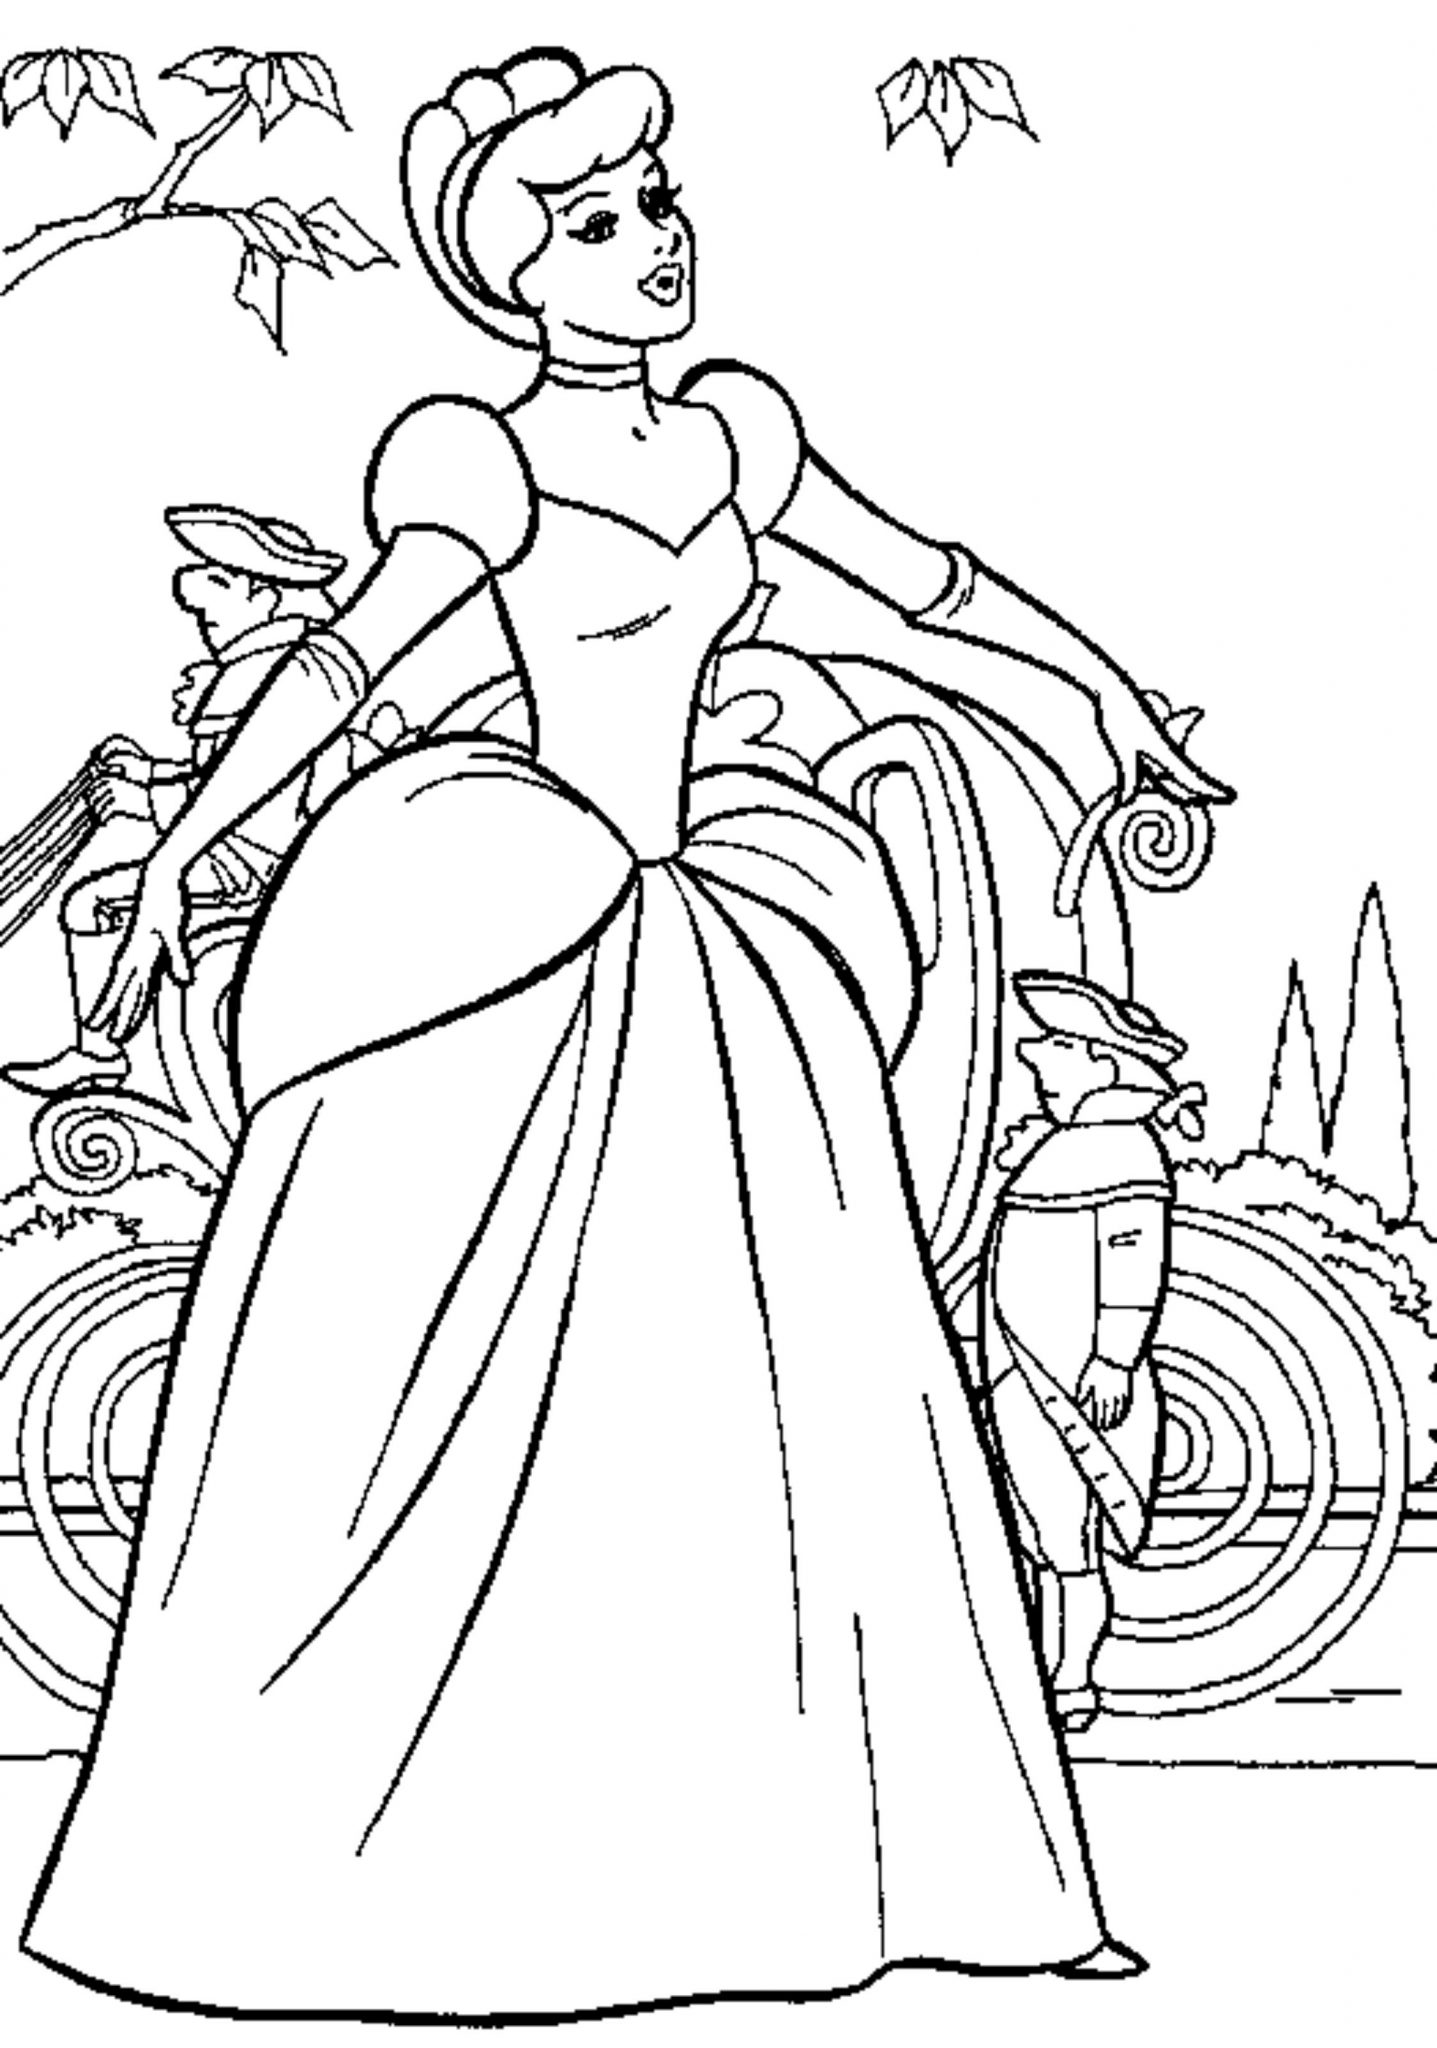 21-free-printable-coloring-pages-of-princesses